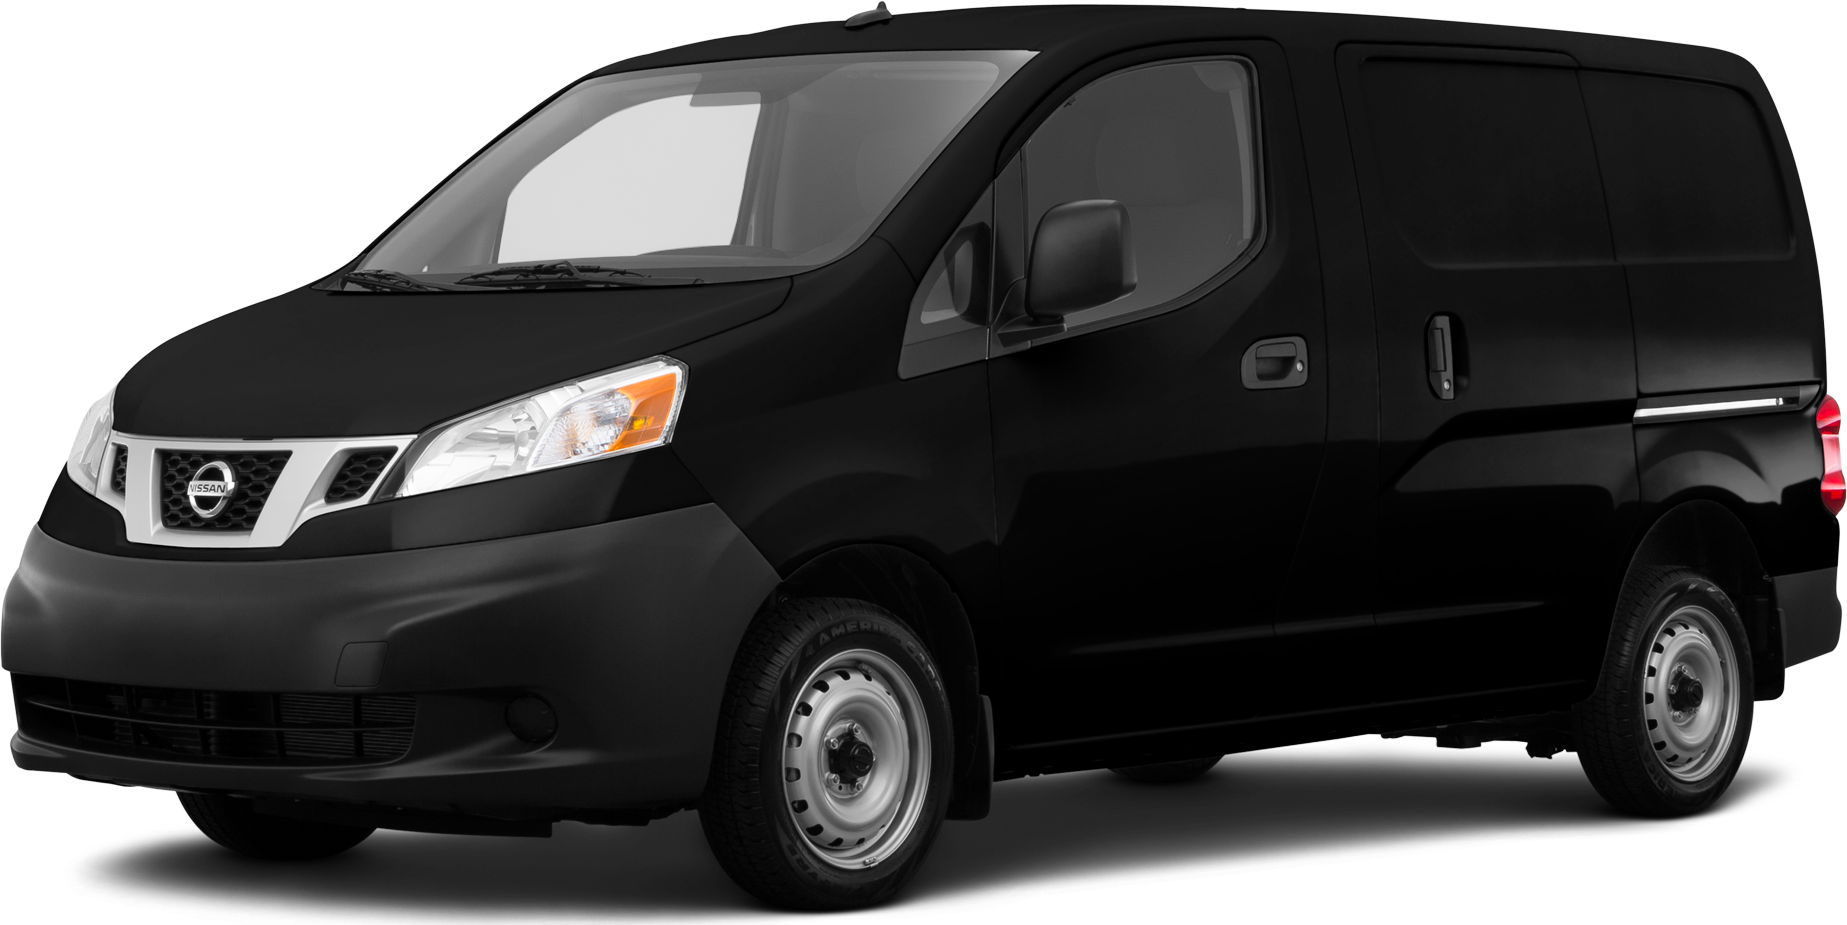 2016 Nissan NV200 Values & Cars for Sale | Kelley Blue Book